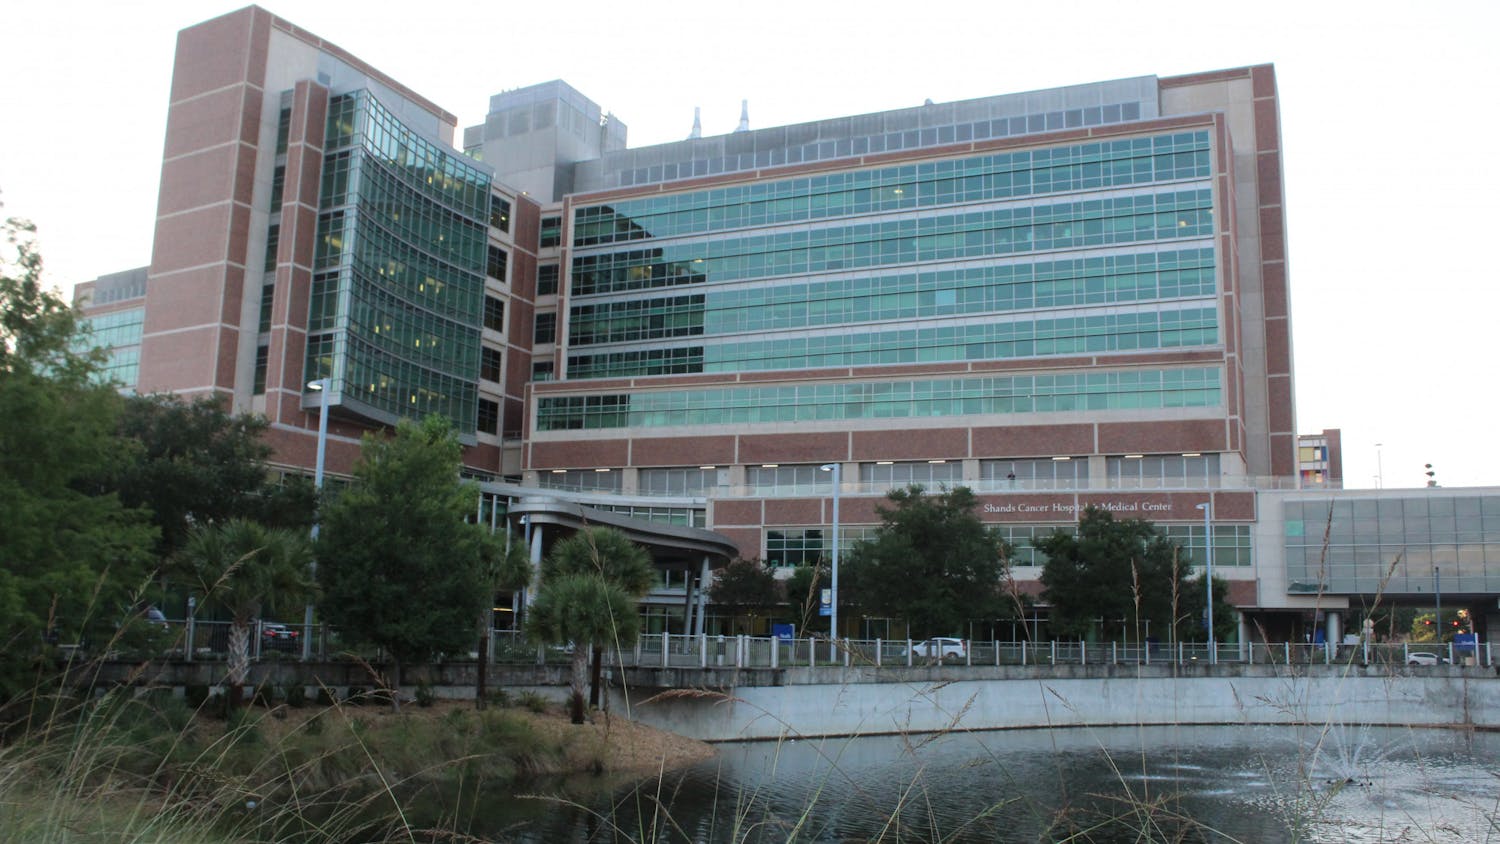 Shands Cancer Hospital and Medical Center is seen.